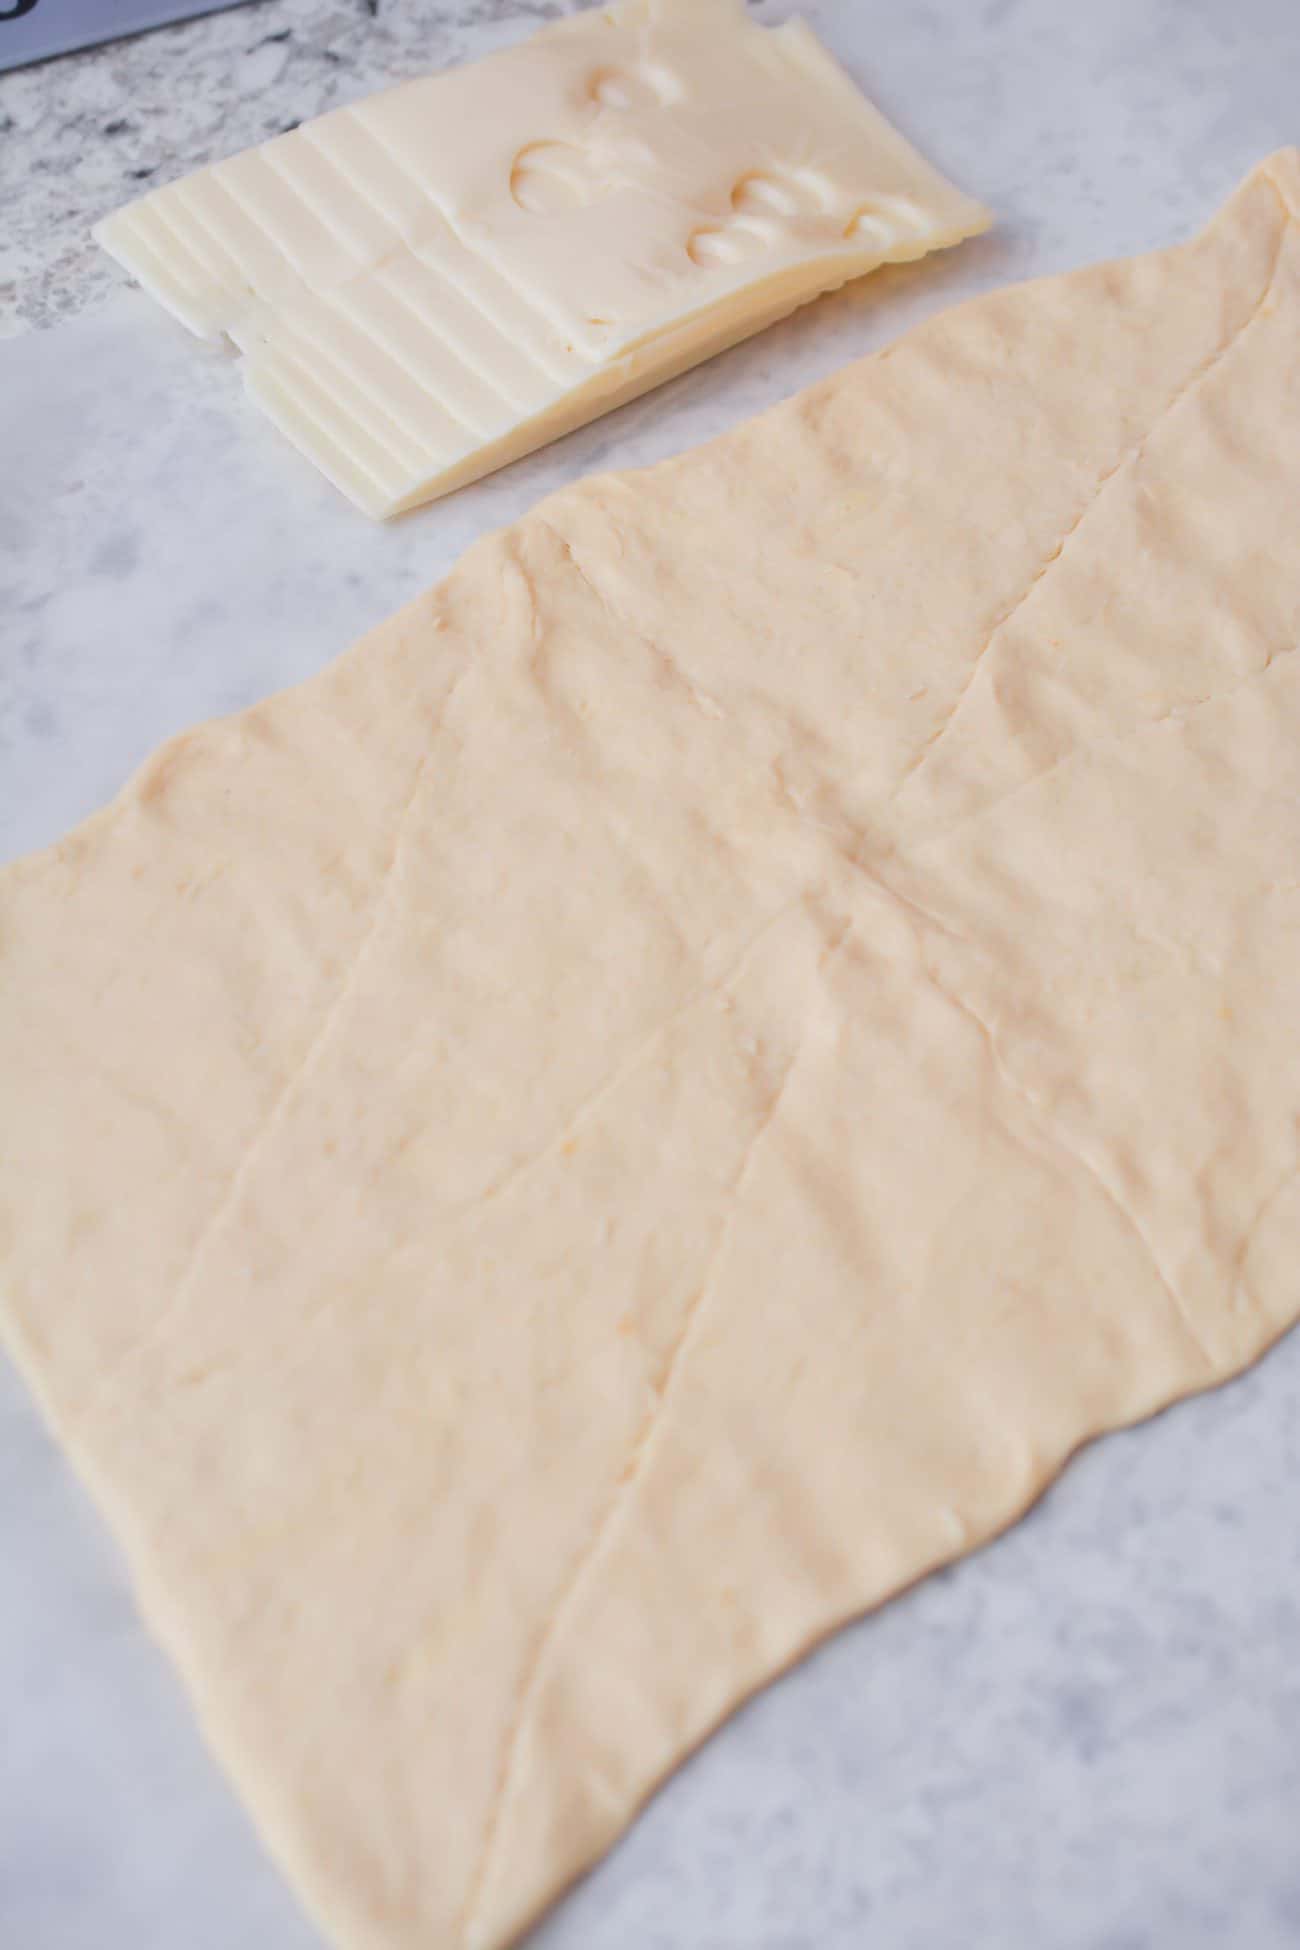 Roll the crescent roll dough out on a parchment-lined surface, and pinch together the seams to form one single sheet of dough.